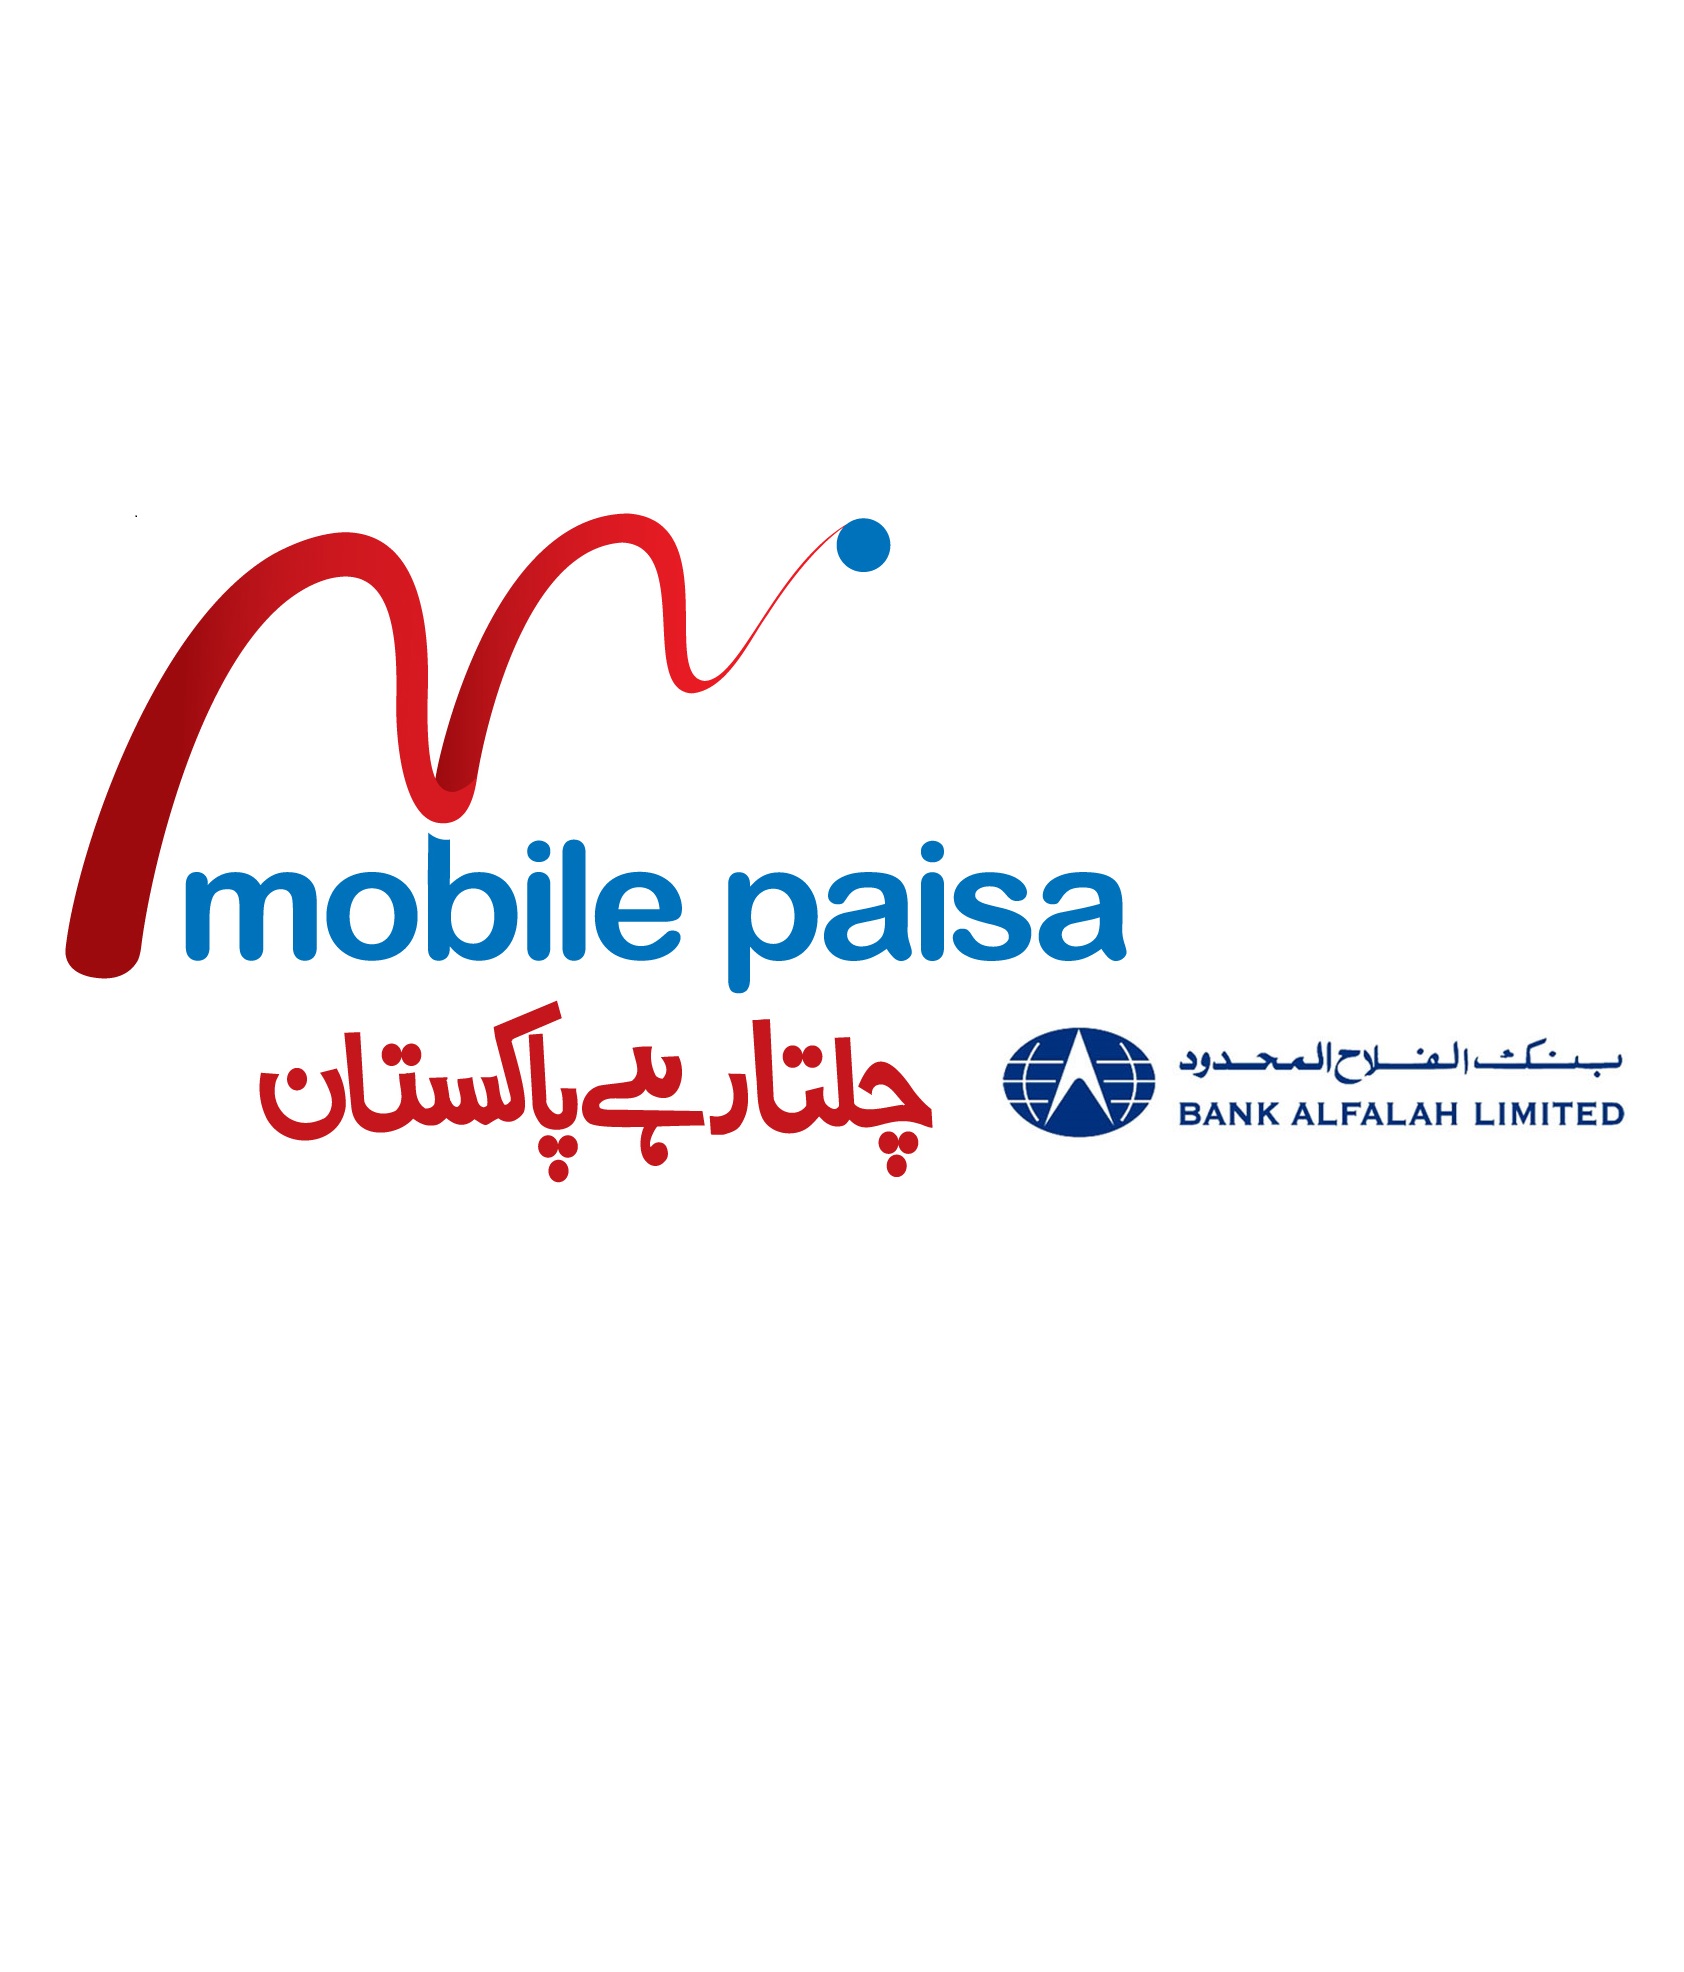 Warid Commercially Launches Mobile Paisa